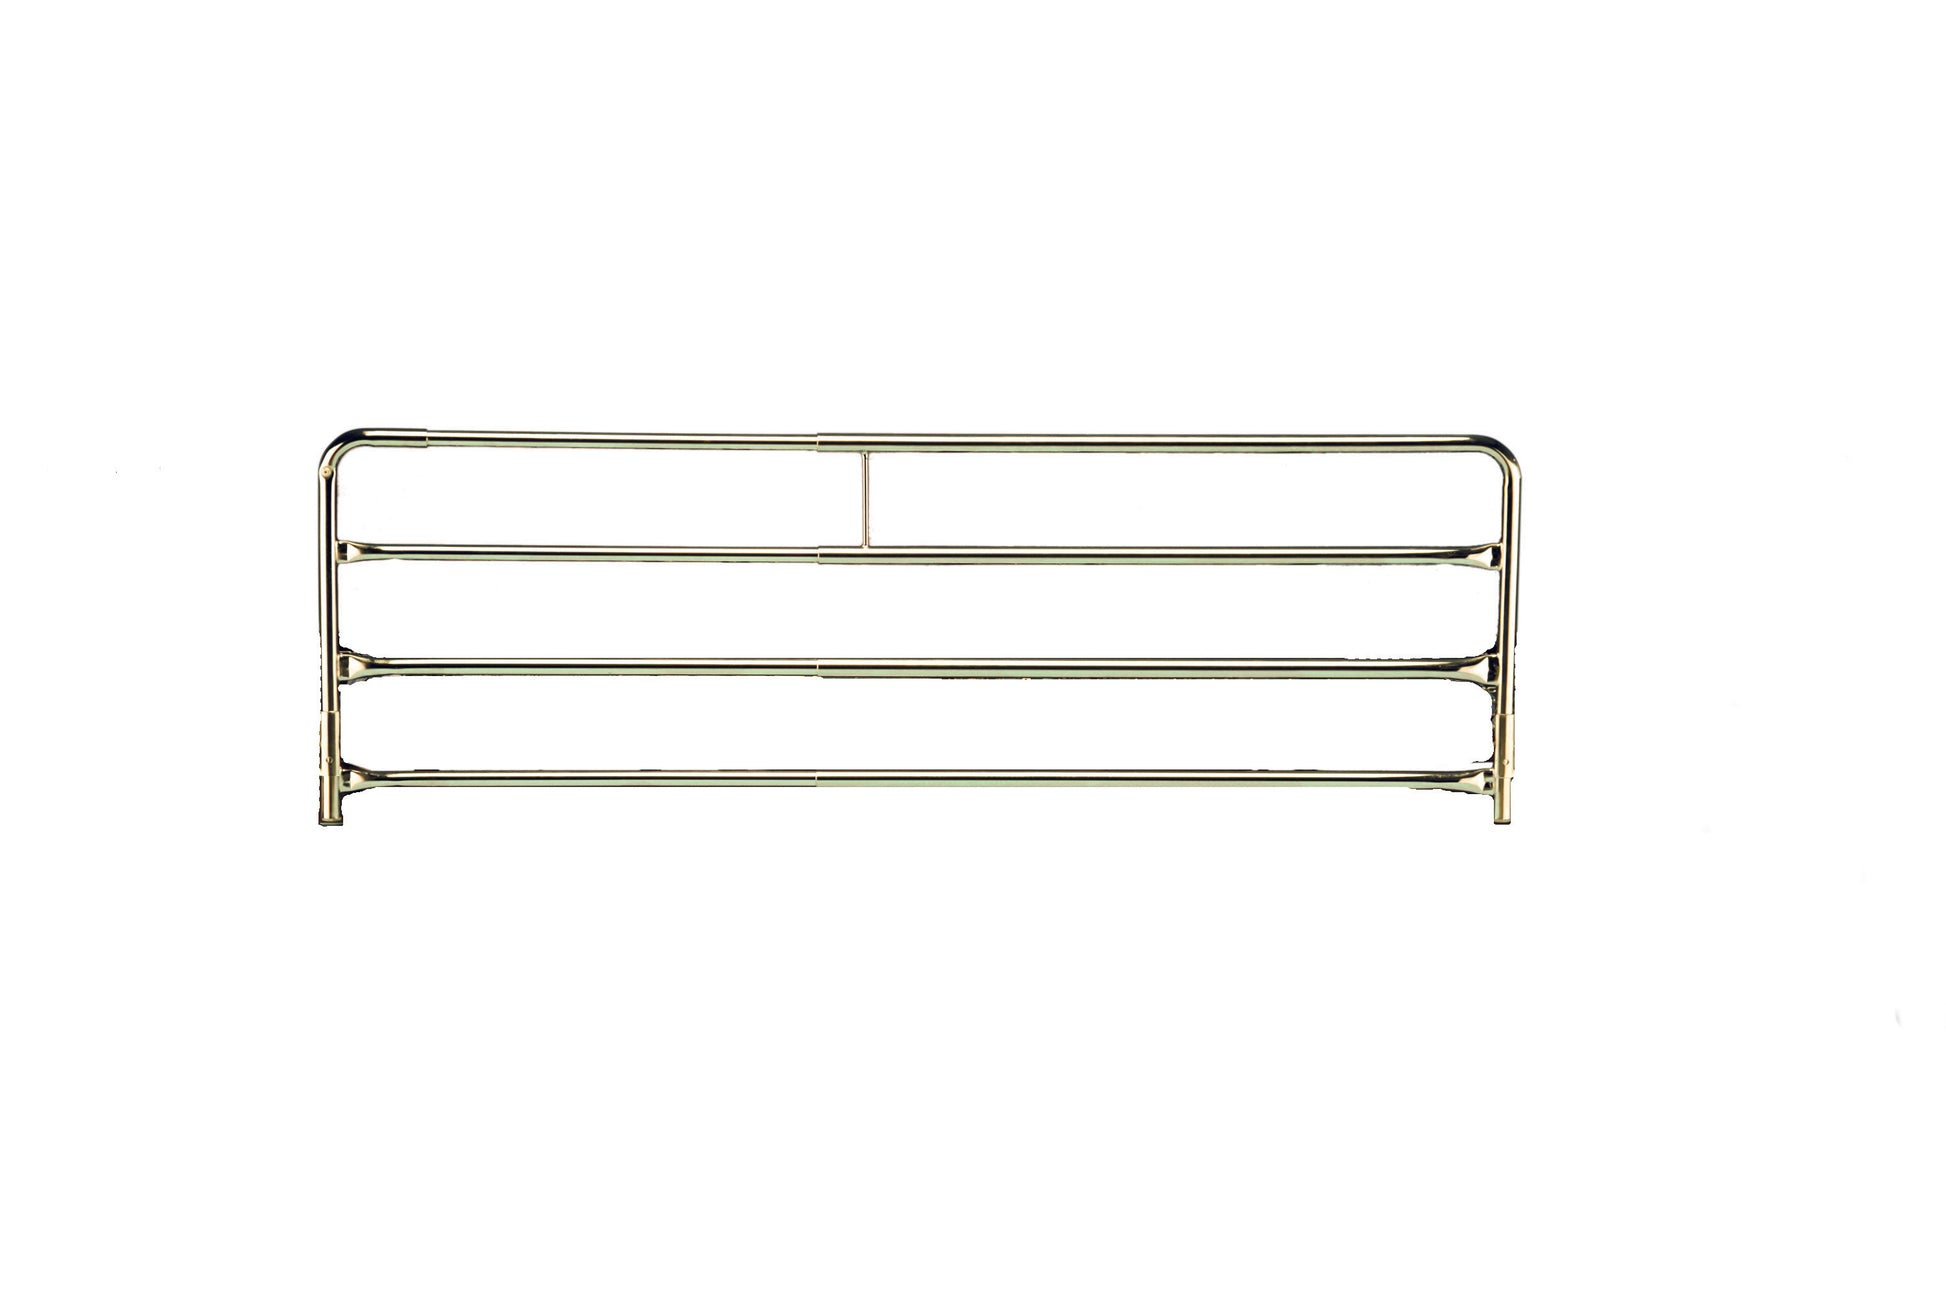 A full view of Invacare item number 6629, a chrome-plated full-length bed rail against a white background.